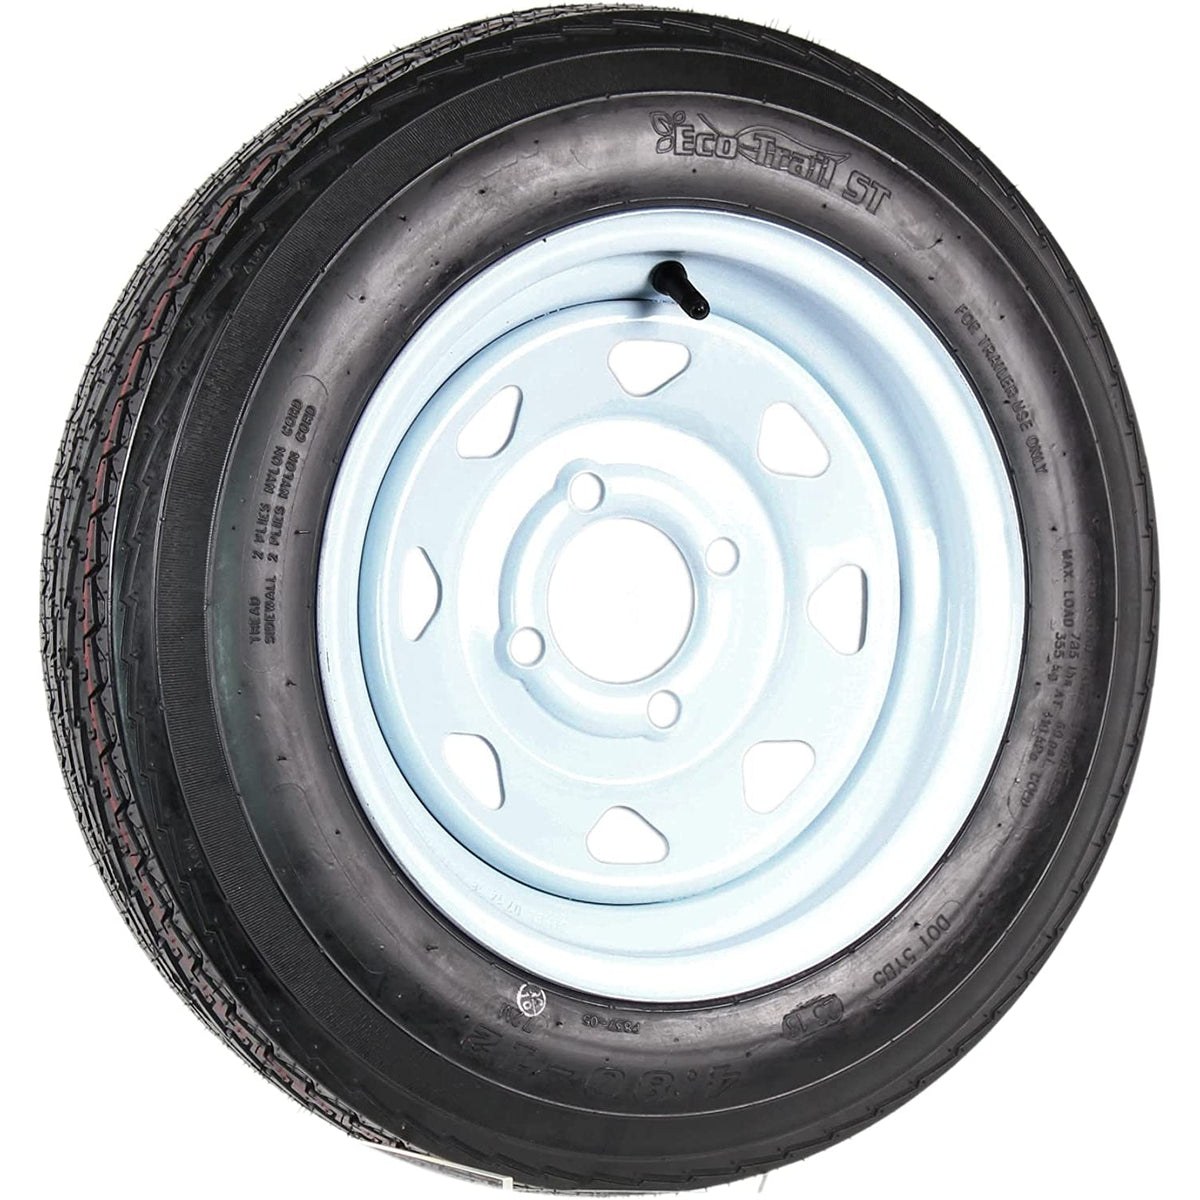 Tredit Tire & Wheel Qualifies for Free Shipping Tredit Tire & Wheel 480-12 4-Lug Trailer Tire/Wheel #Z760710